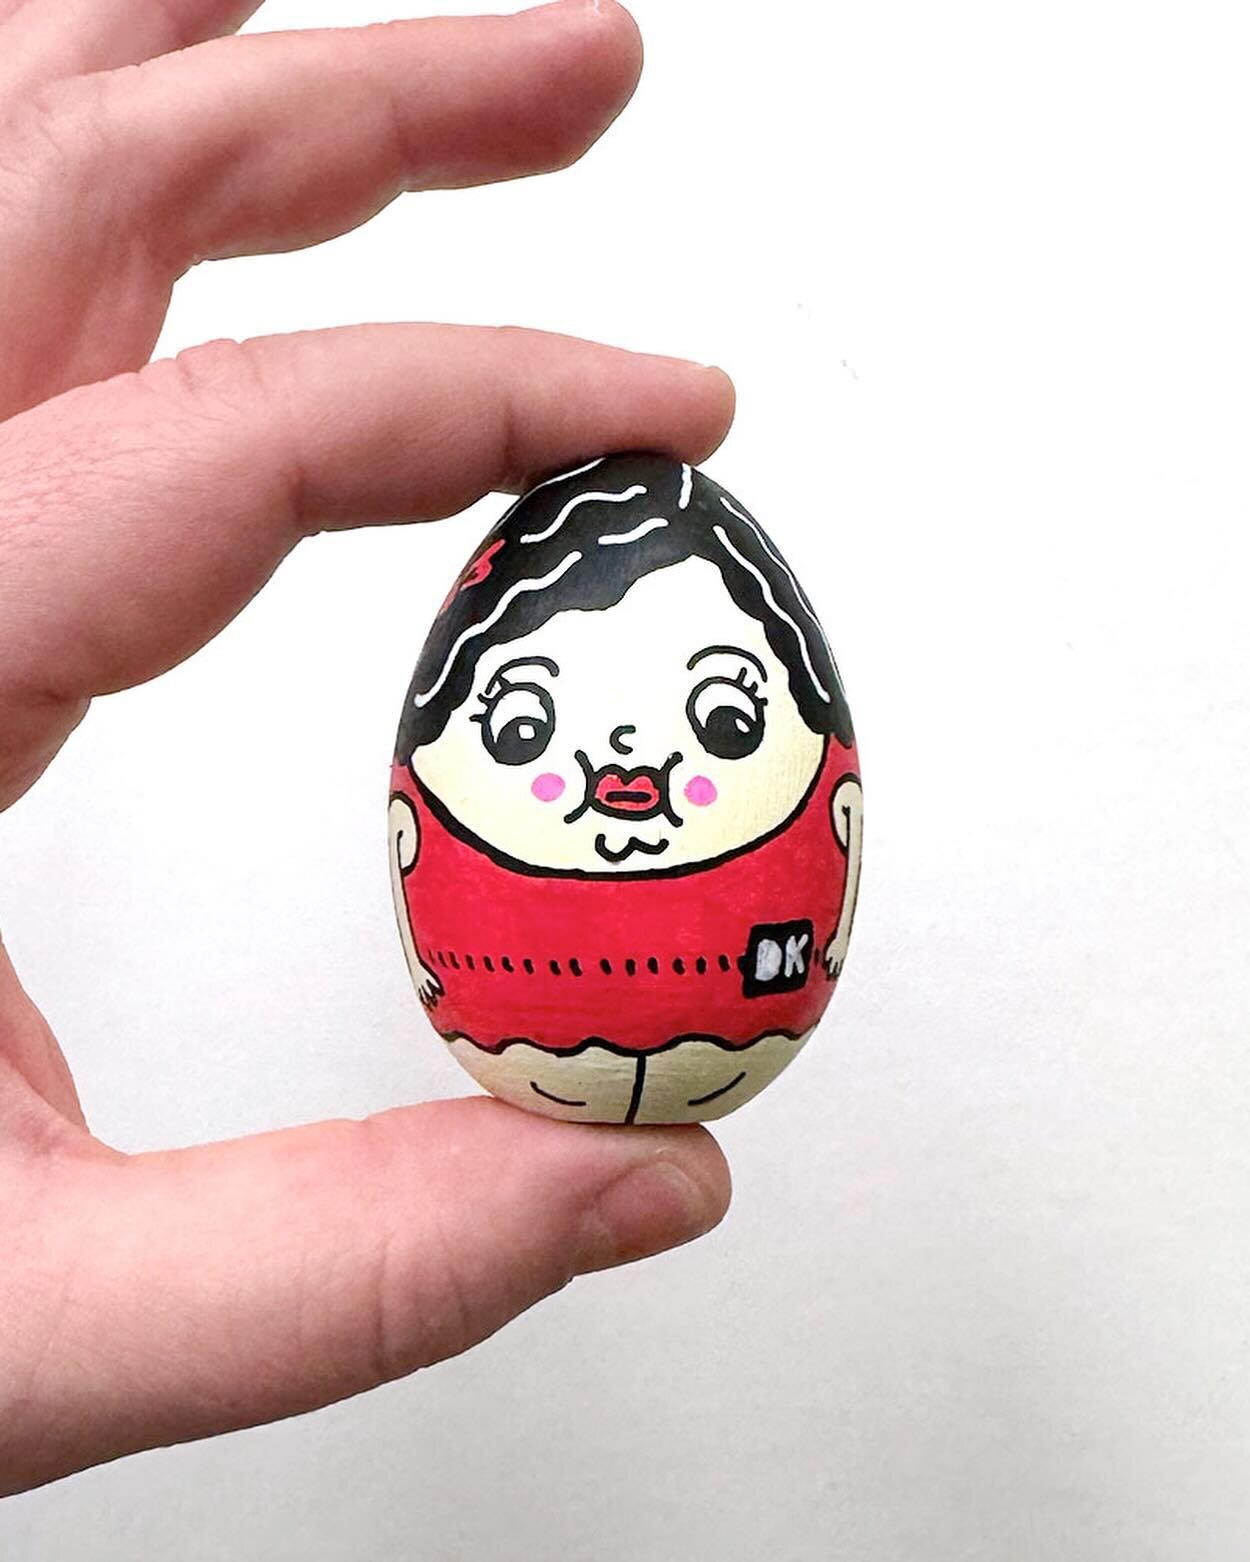 Her rosey cheeks, red dress and short legs are sure to get someones attention. This roaring twenties beauty is ready for a new home to party in. #eggprize #artegg #eggdesign #roseycheeks #cute #roaringtwenties #illustration #DK #art #sculpture #minia